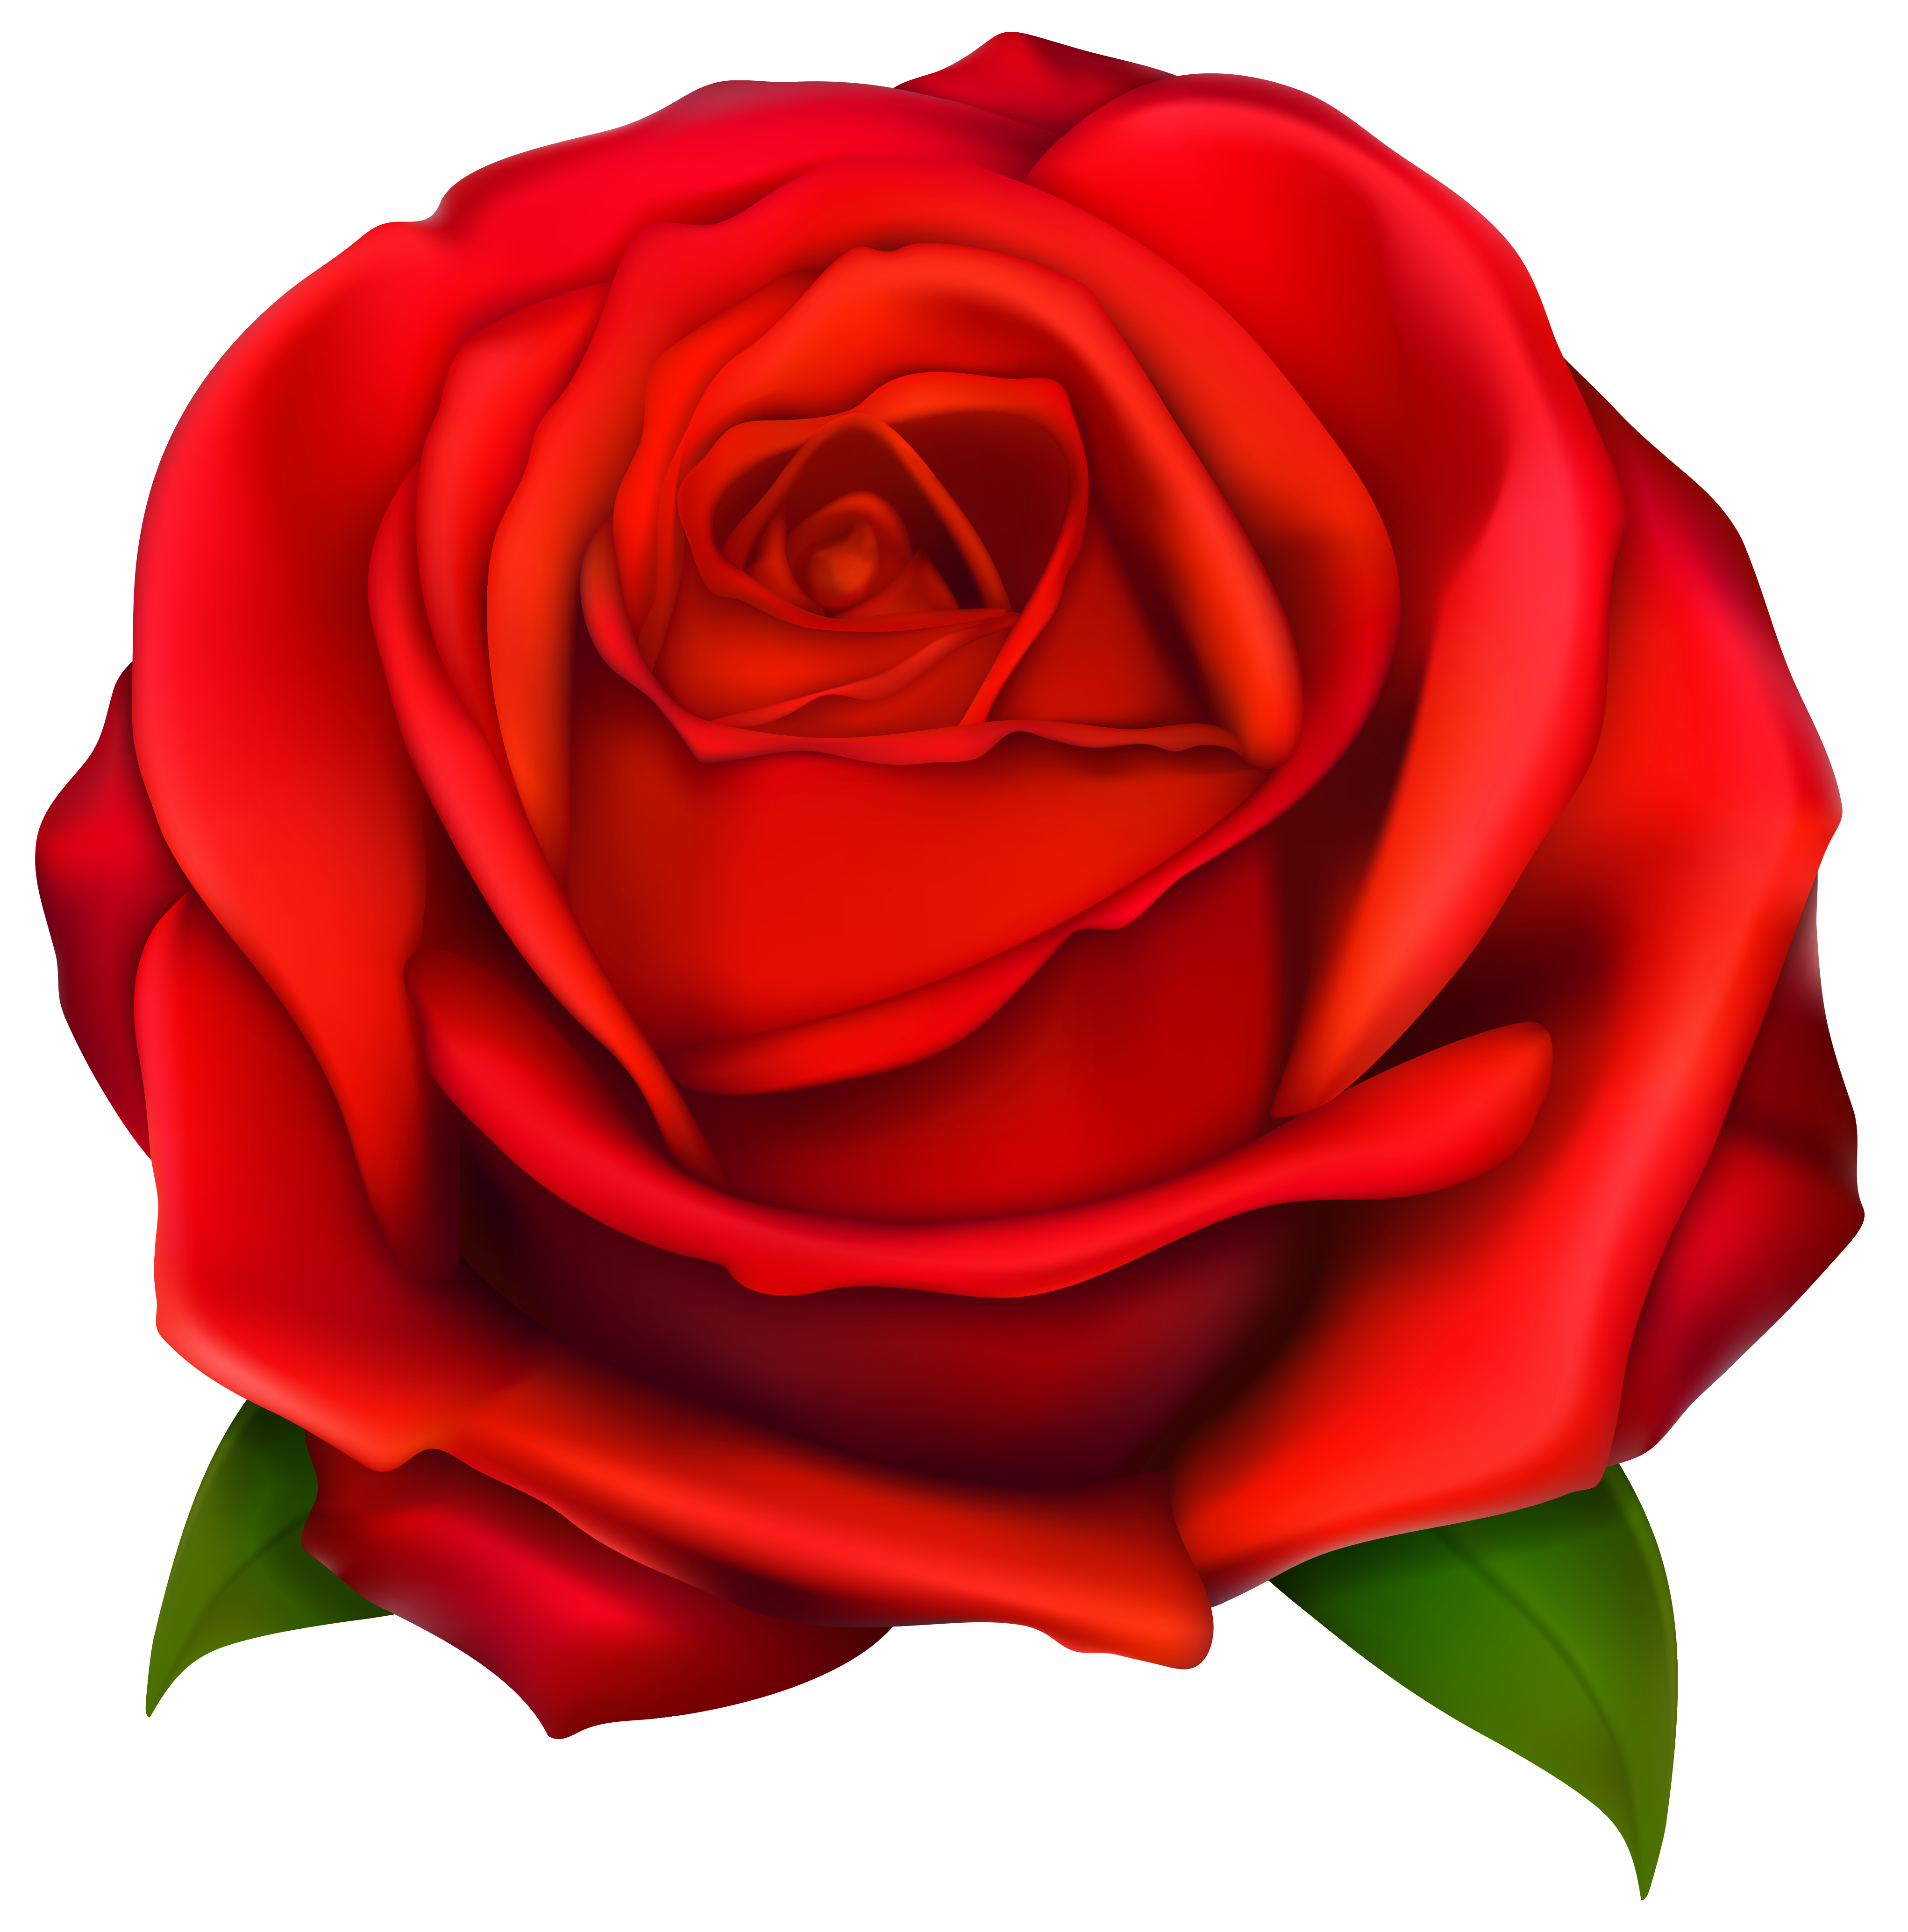 Image of Clip Art Red Rose #7092, Red Roses Clip Art Images Free ...